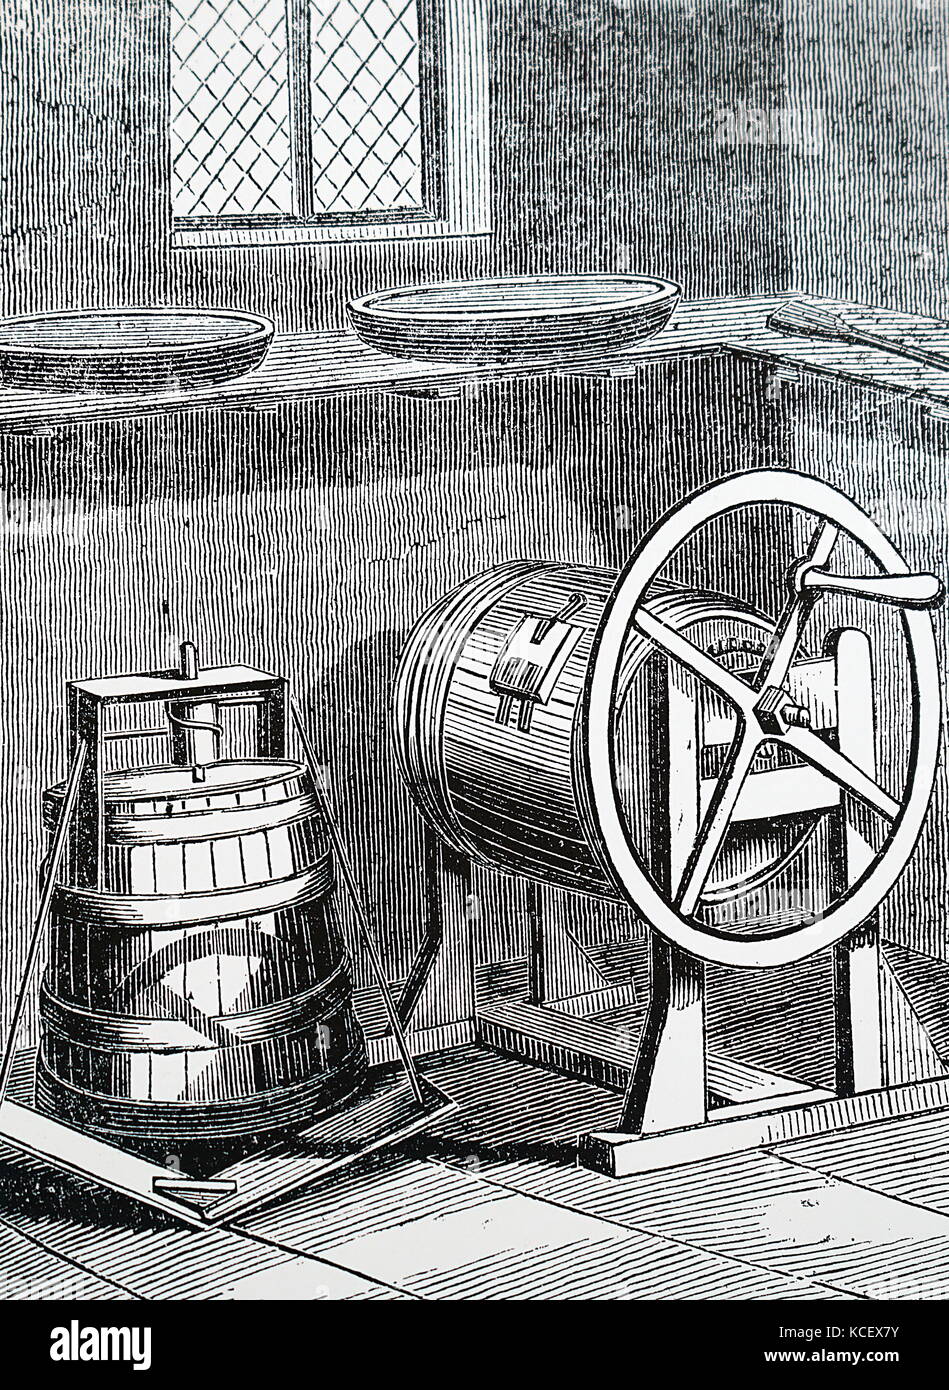 Engraving depicting a vertical treadle butter churn (left) and a barrel churn containing an axle with fan vanes turned by a crank handle. Dated 19th Century Stock Photo